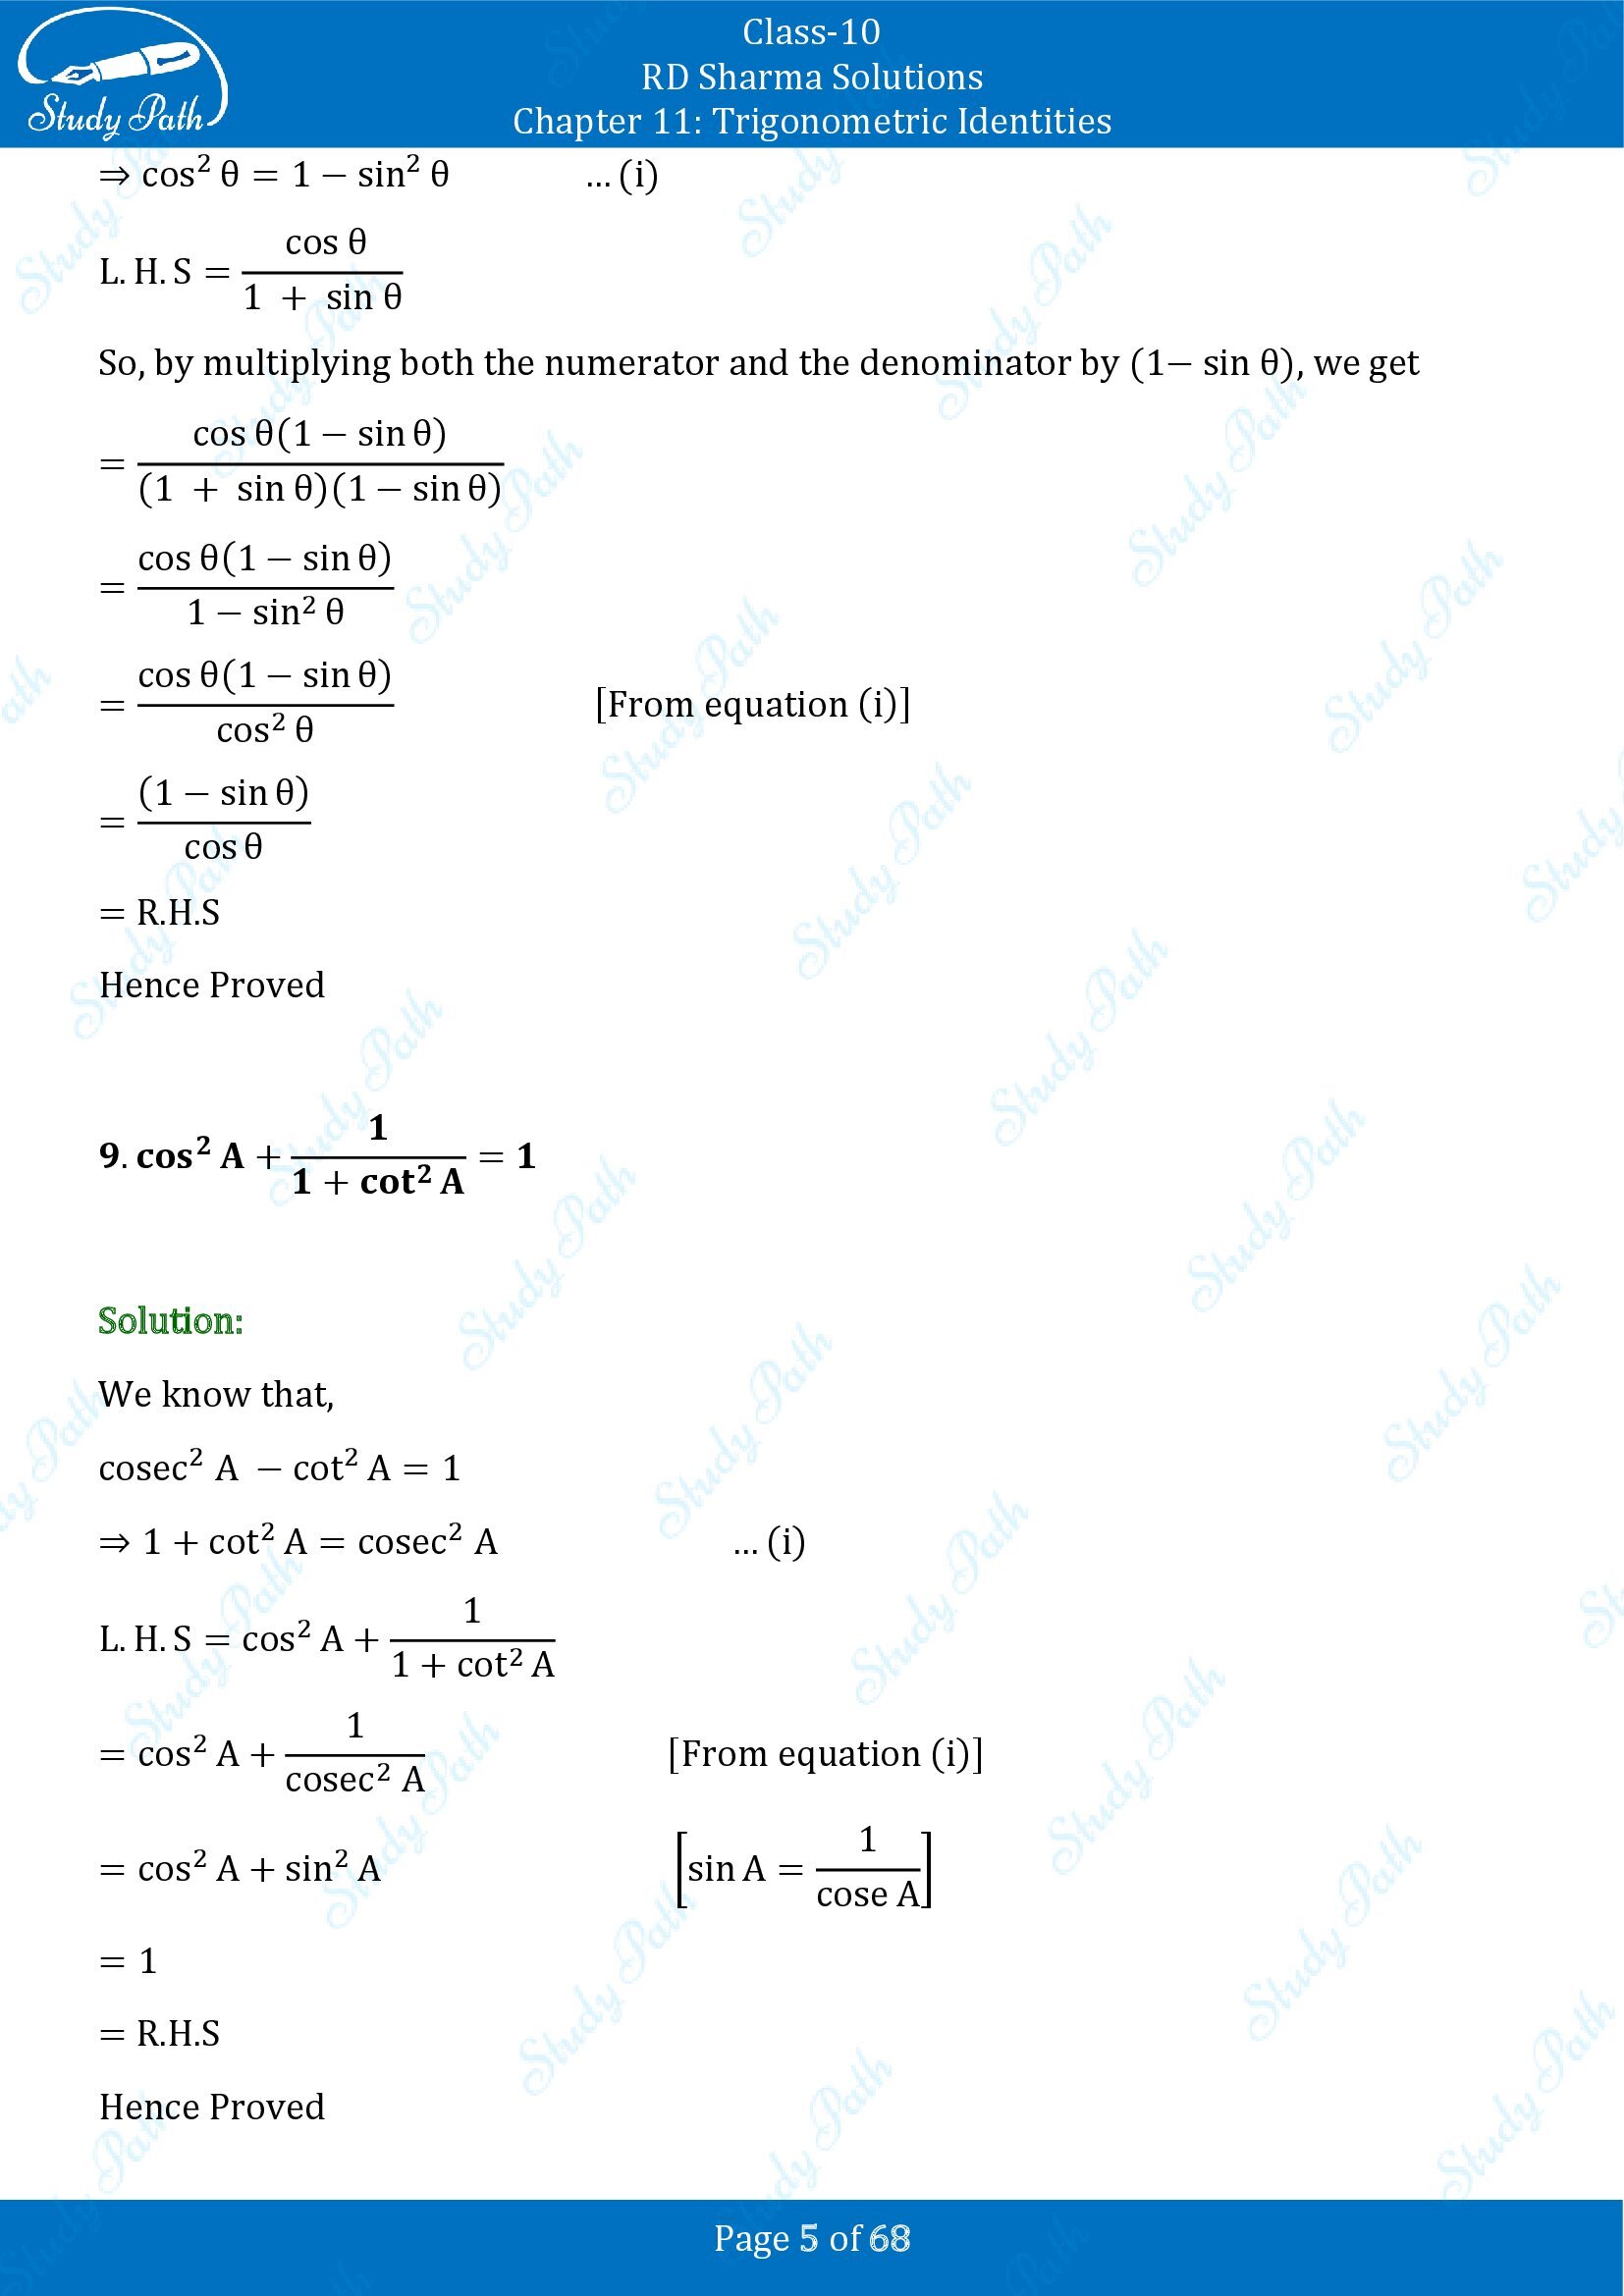 RD Sharma Solutions Class 10 Chapter 11 Trigonometric Identities Exercise 11.1 00005